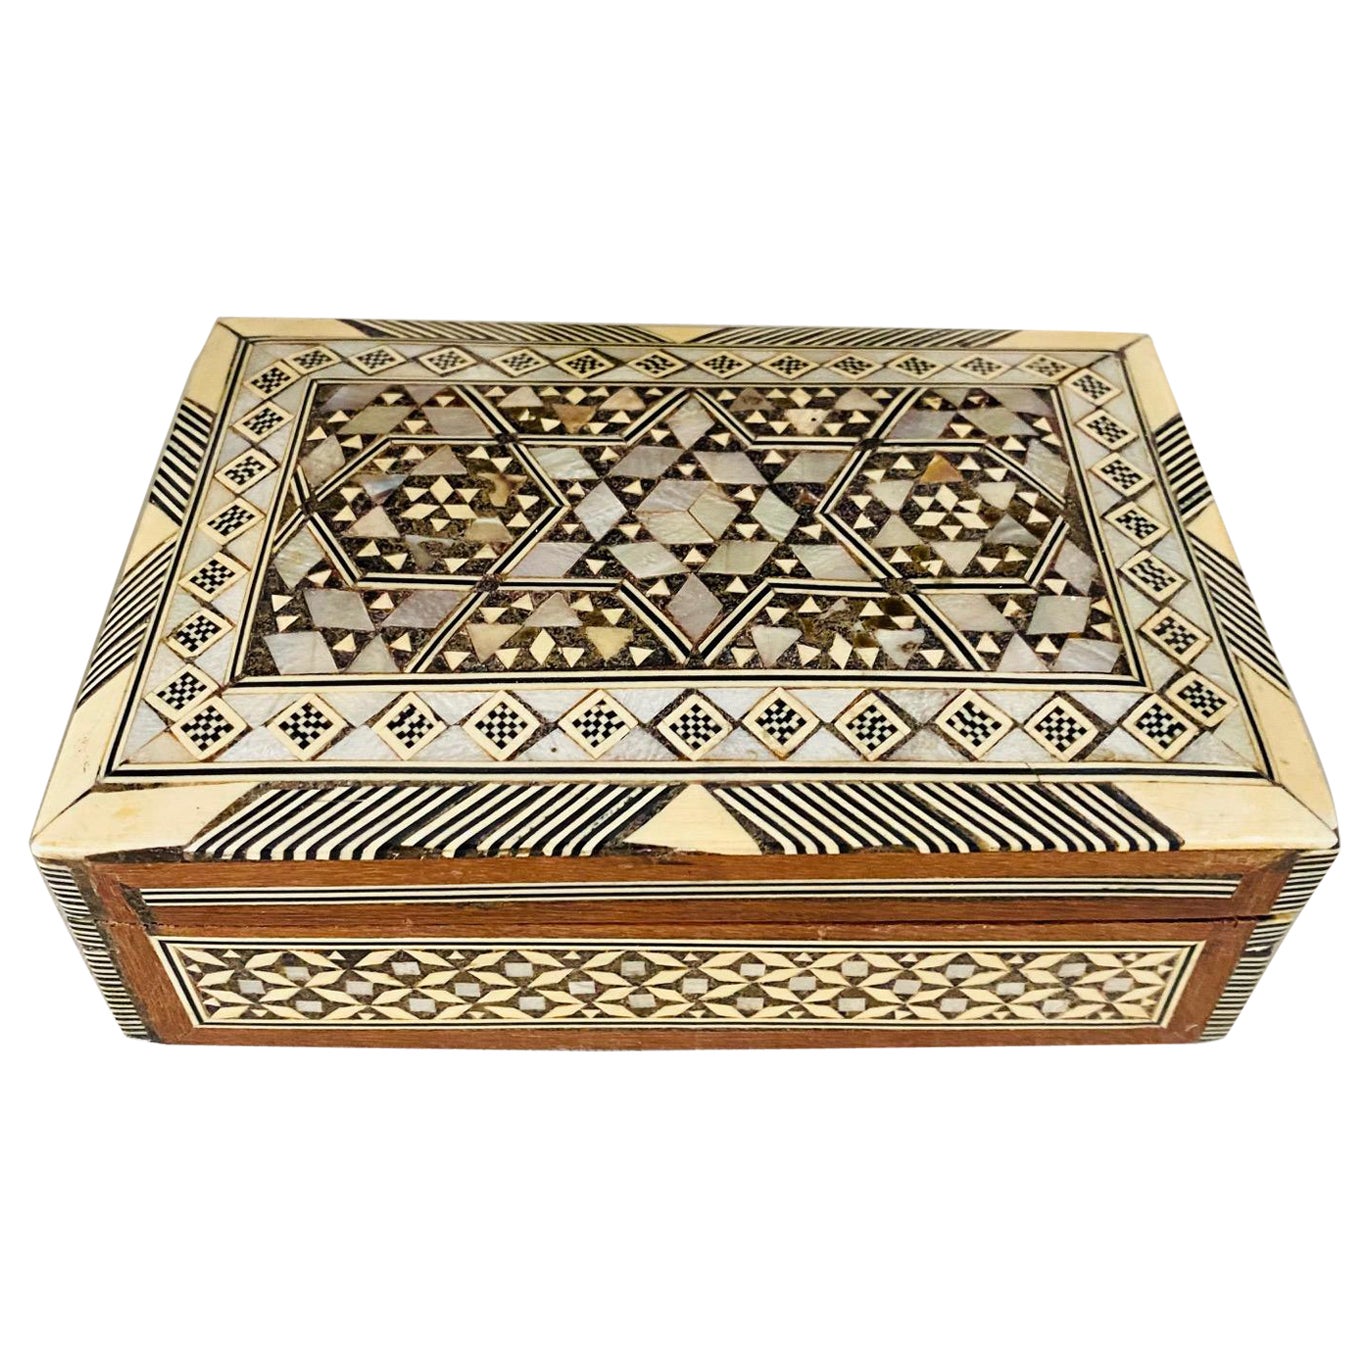 Mosaic Wood Box with Inlays of Bone and Mother of Pearl, Middle East, C. 1950s